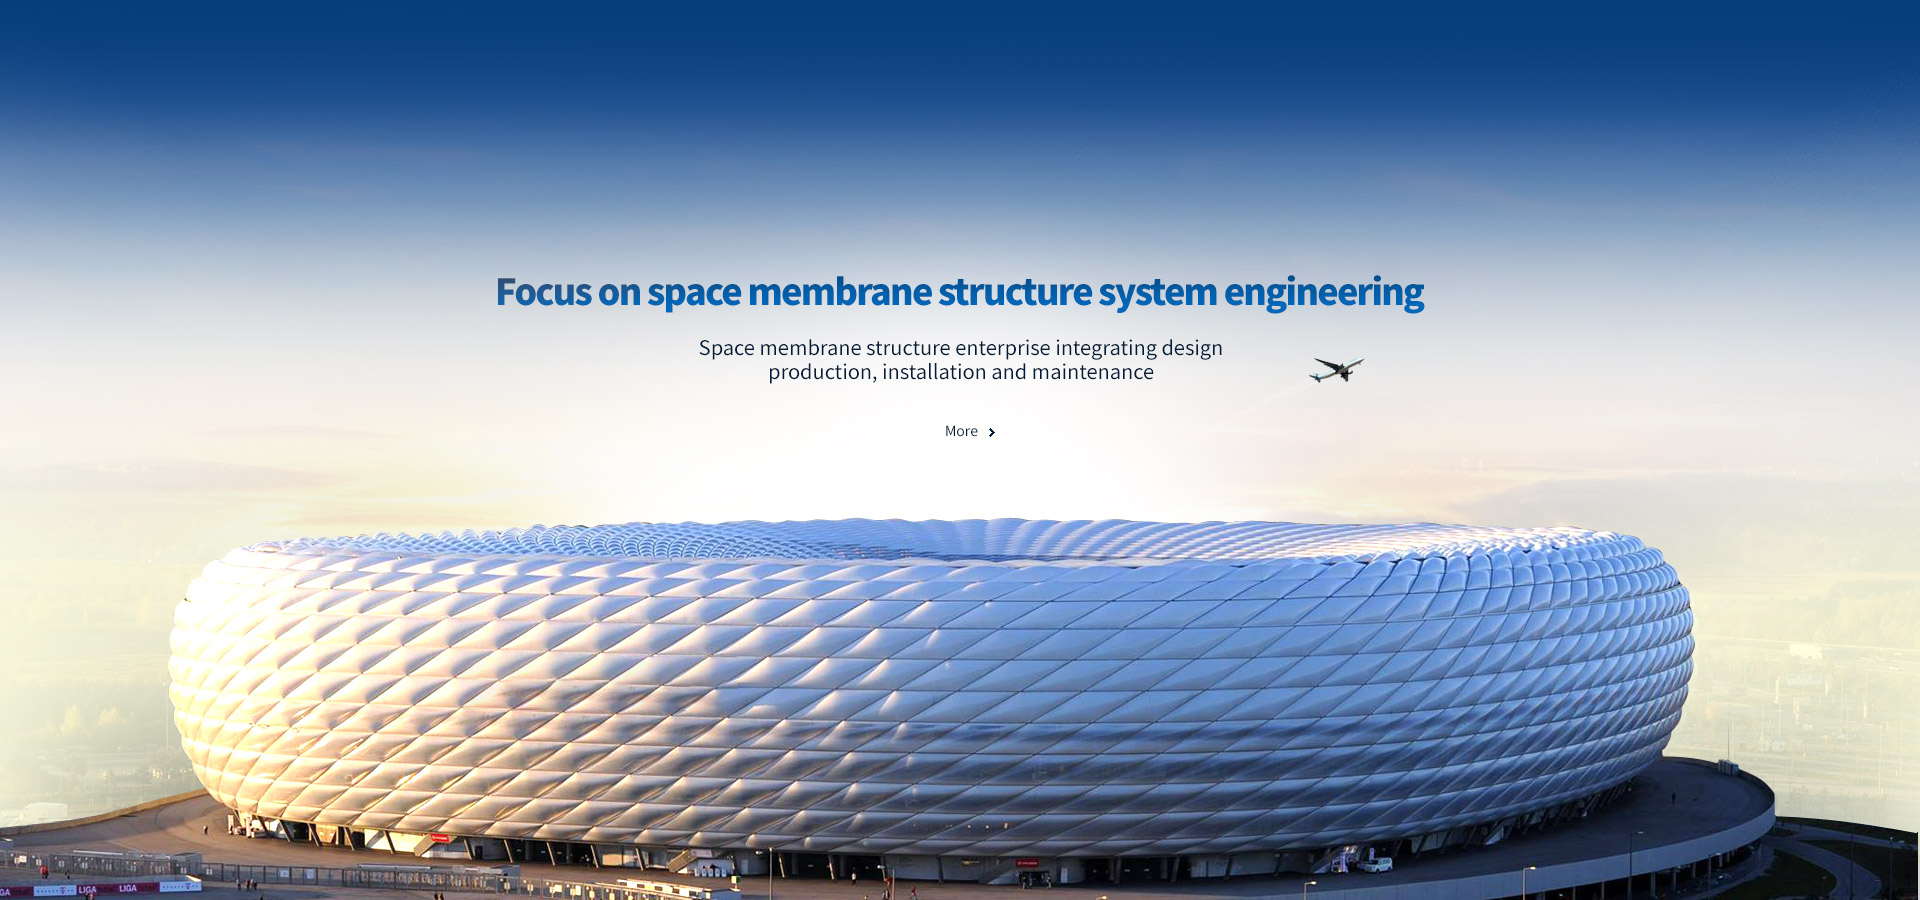 Focus on space membrane structure system engineering, set design, production, installation, maintenance as one of the space.